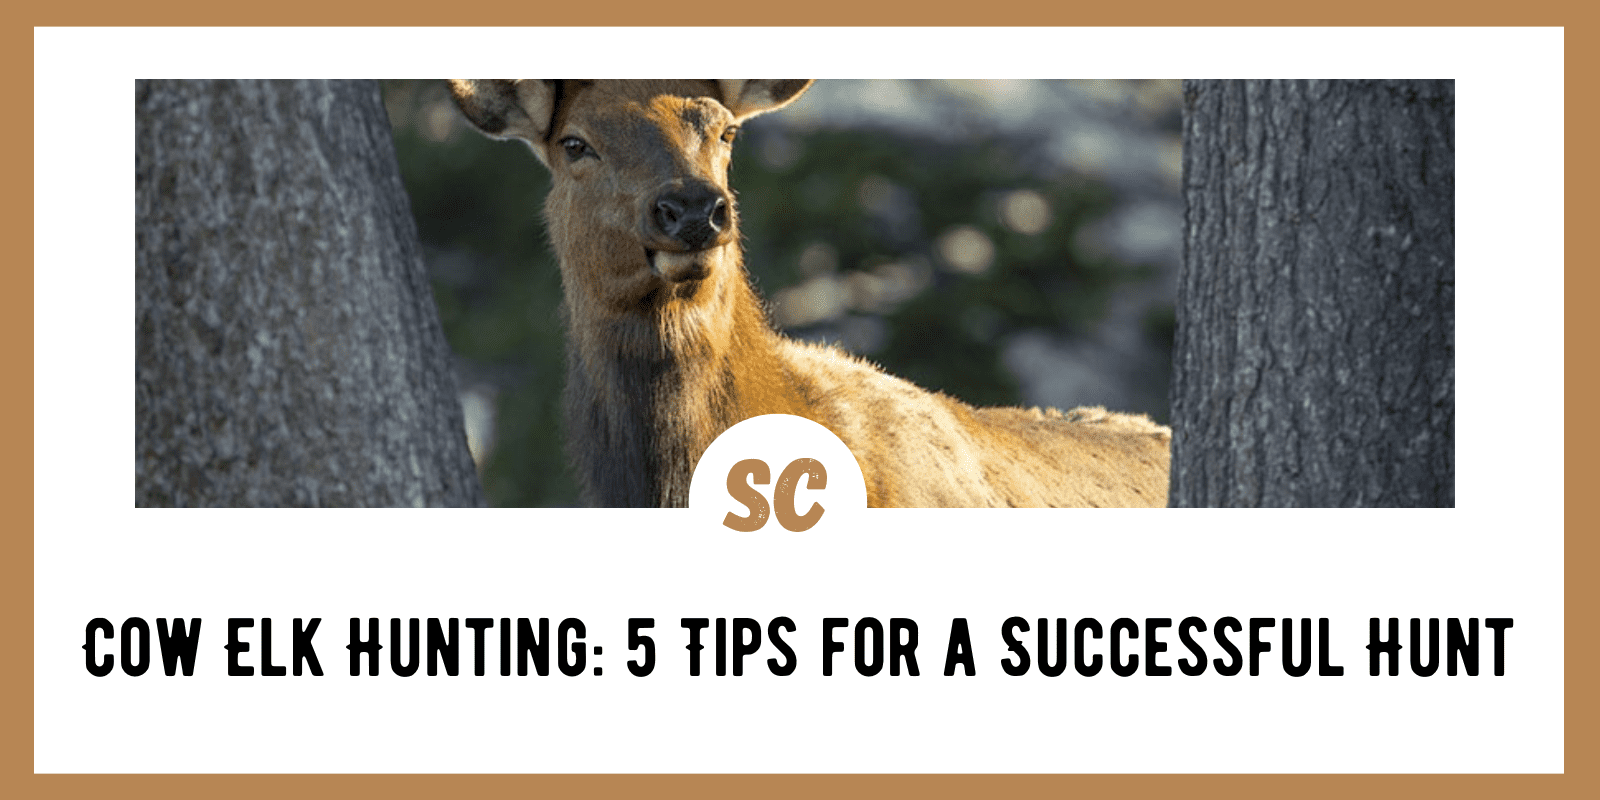 Cow Elk Hunting: 5 Tips for a Successful Hunt